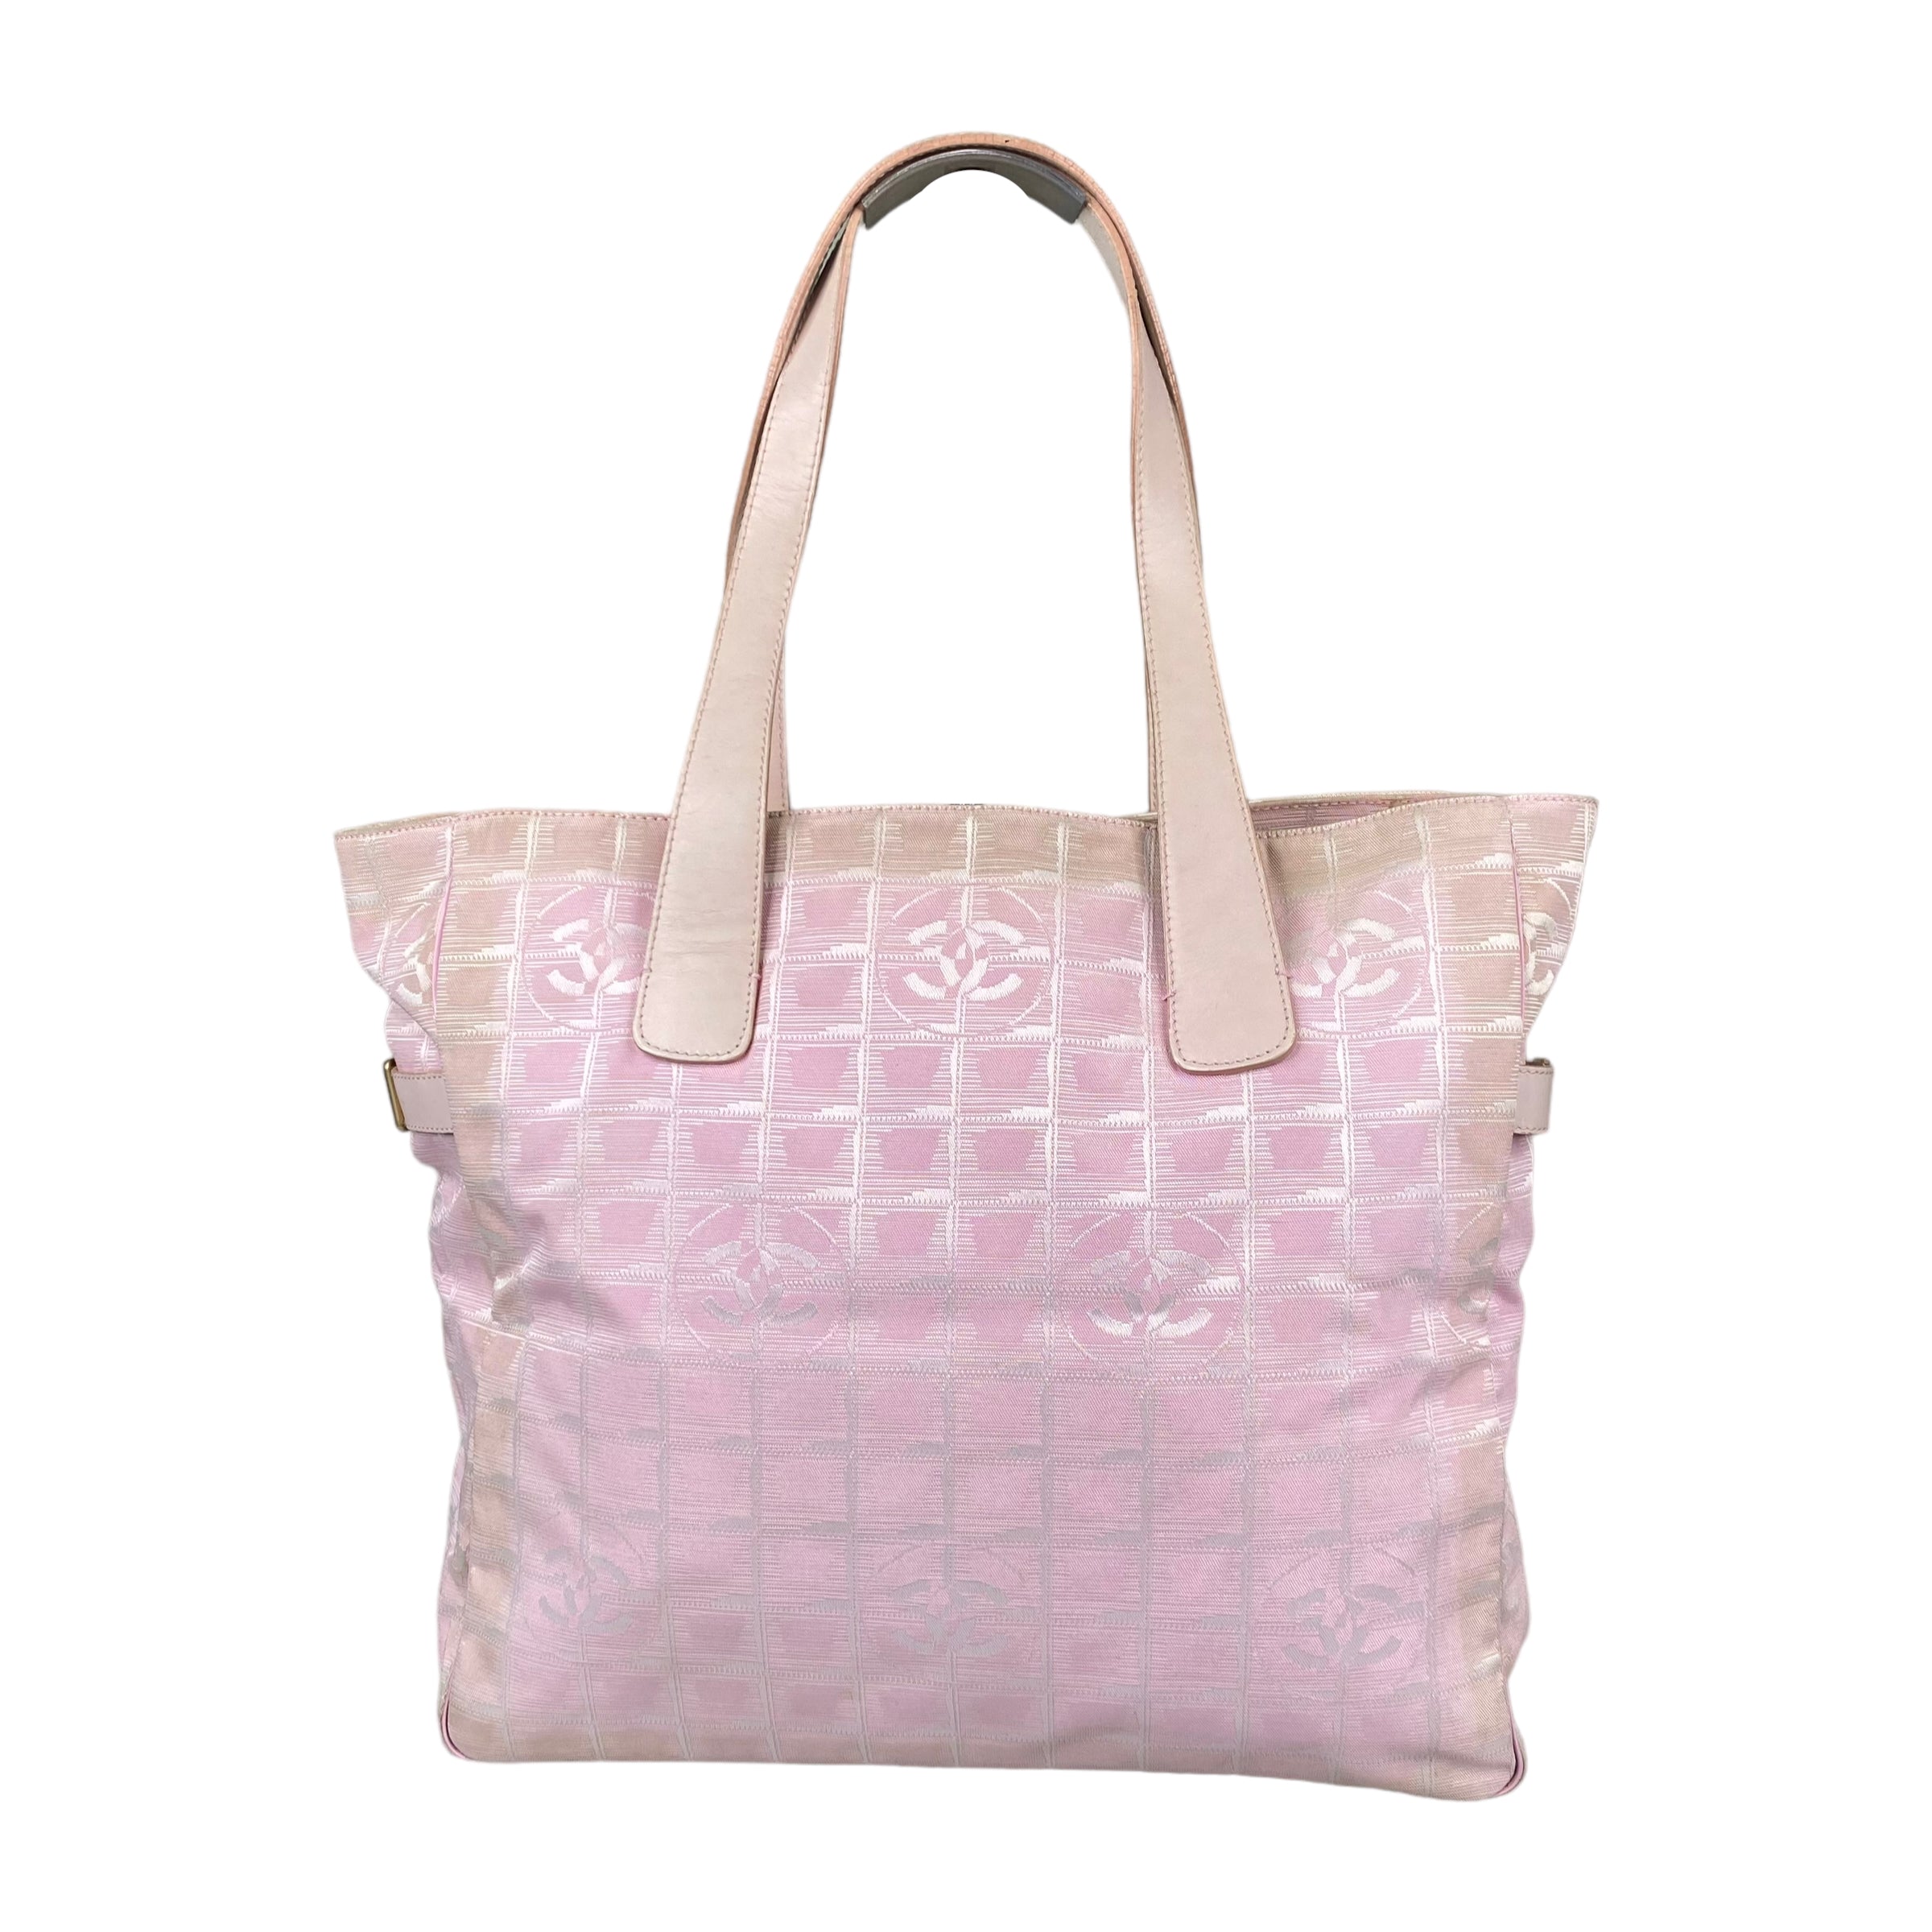 CHANEL NEW TRAVEL LINE PINK LARGE TOTE